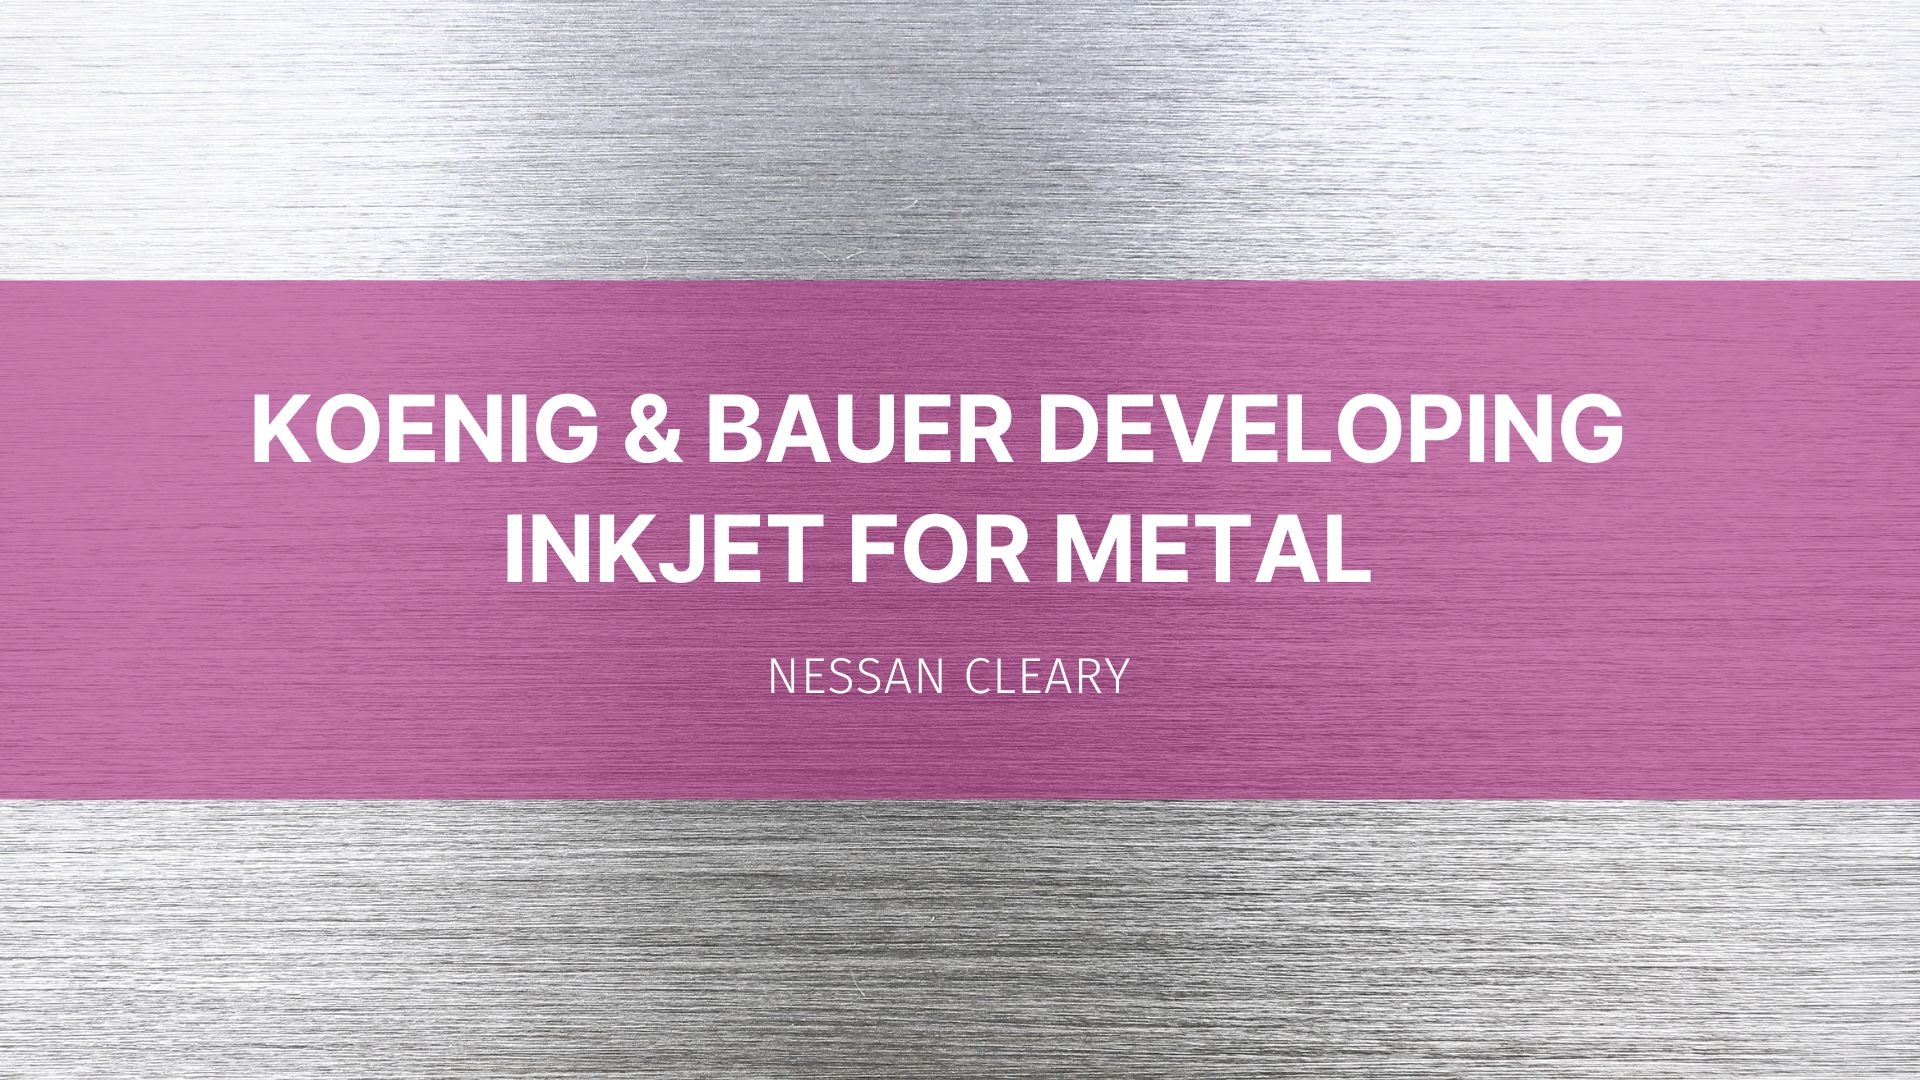 Featured image for “Koenig & Bauer developing inkjet for metal ”